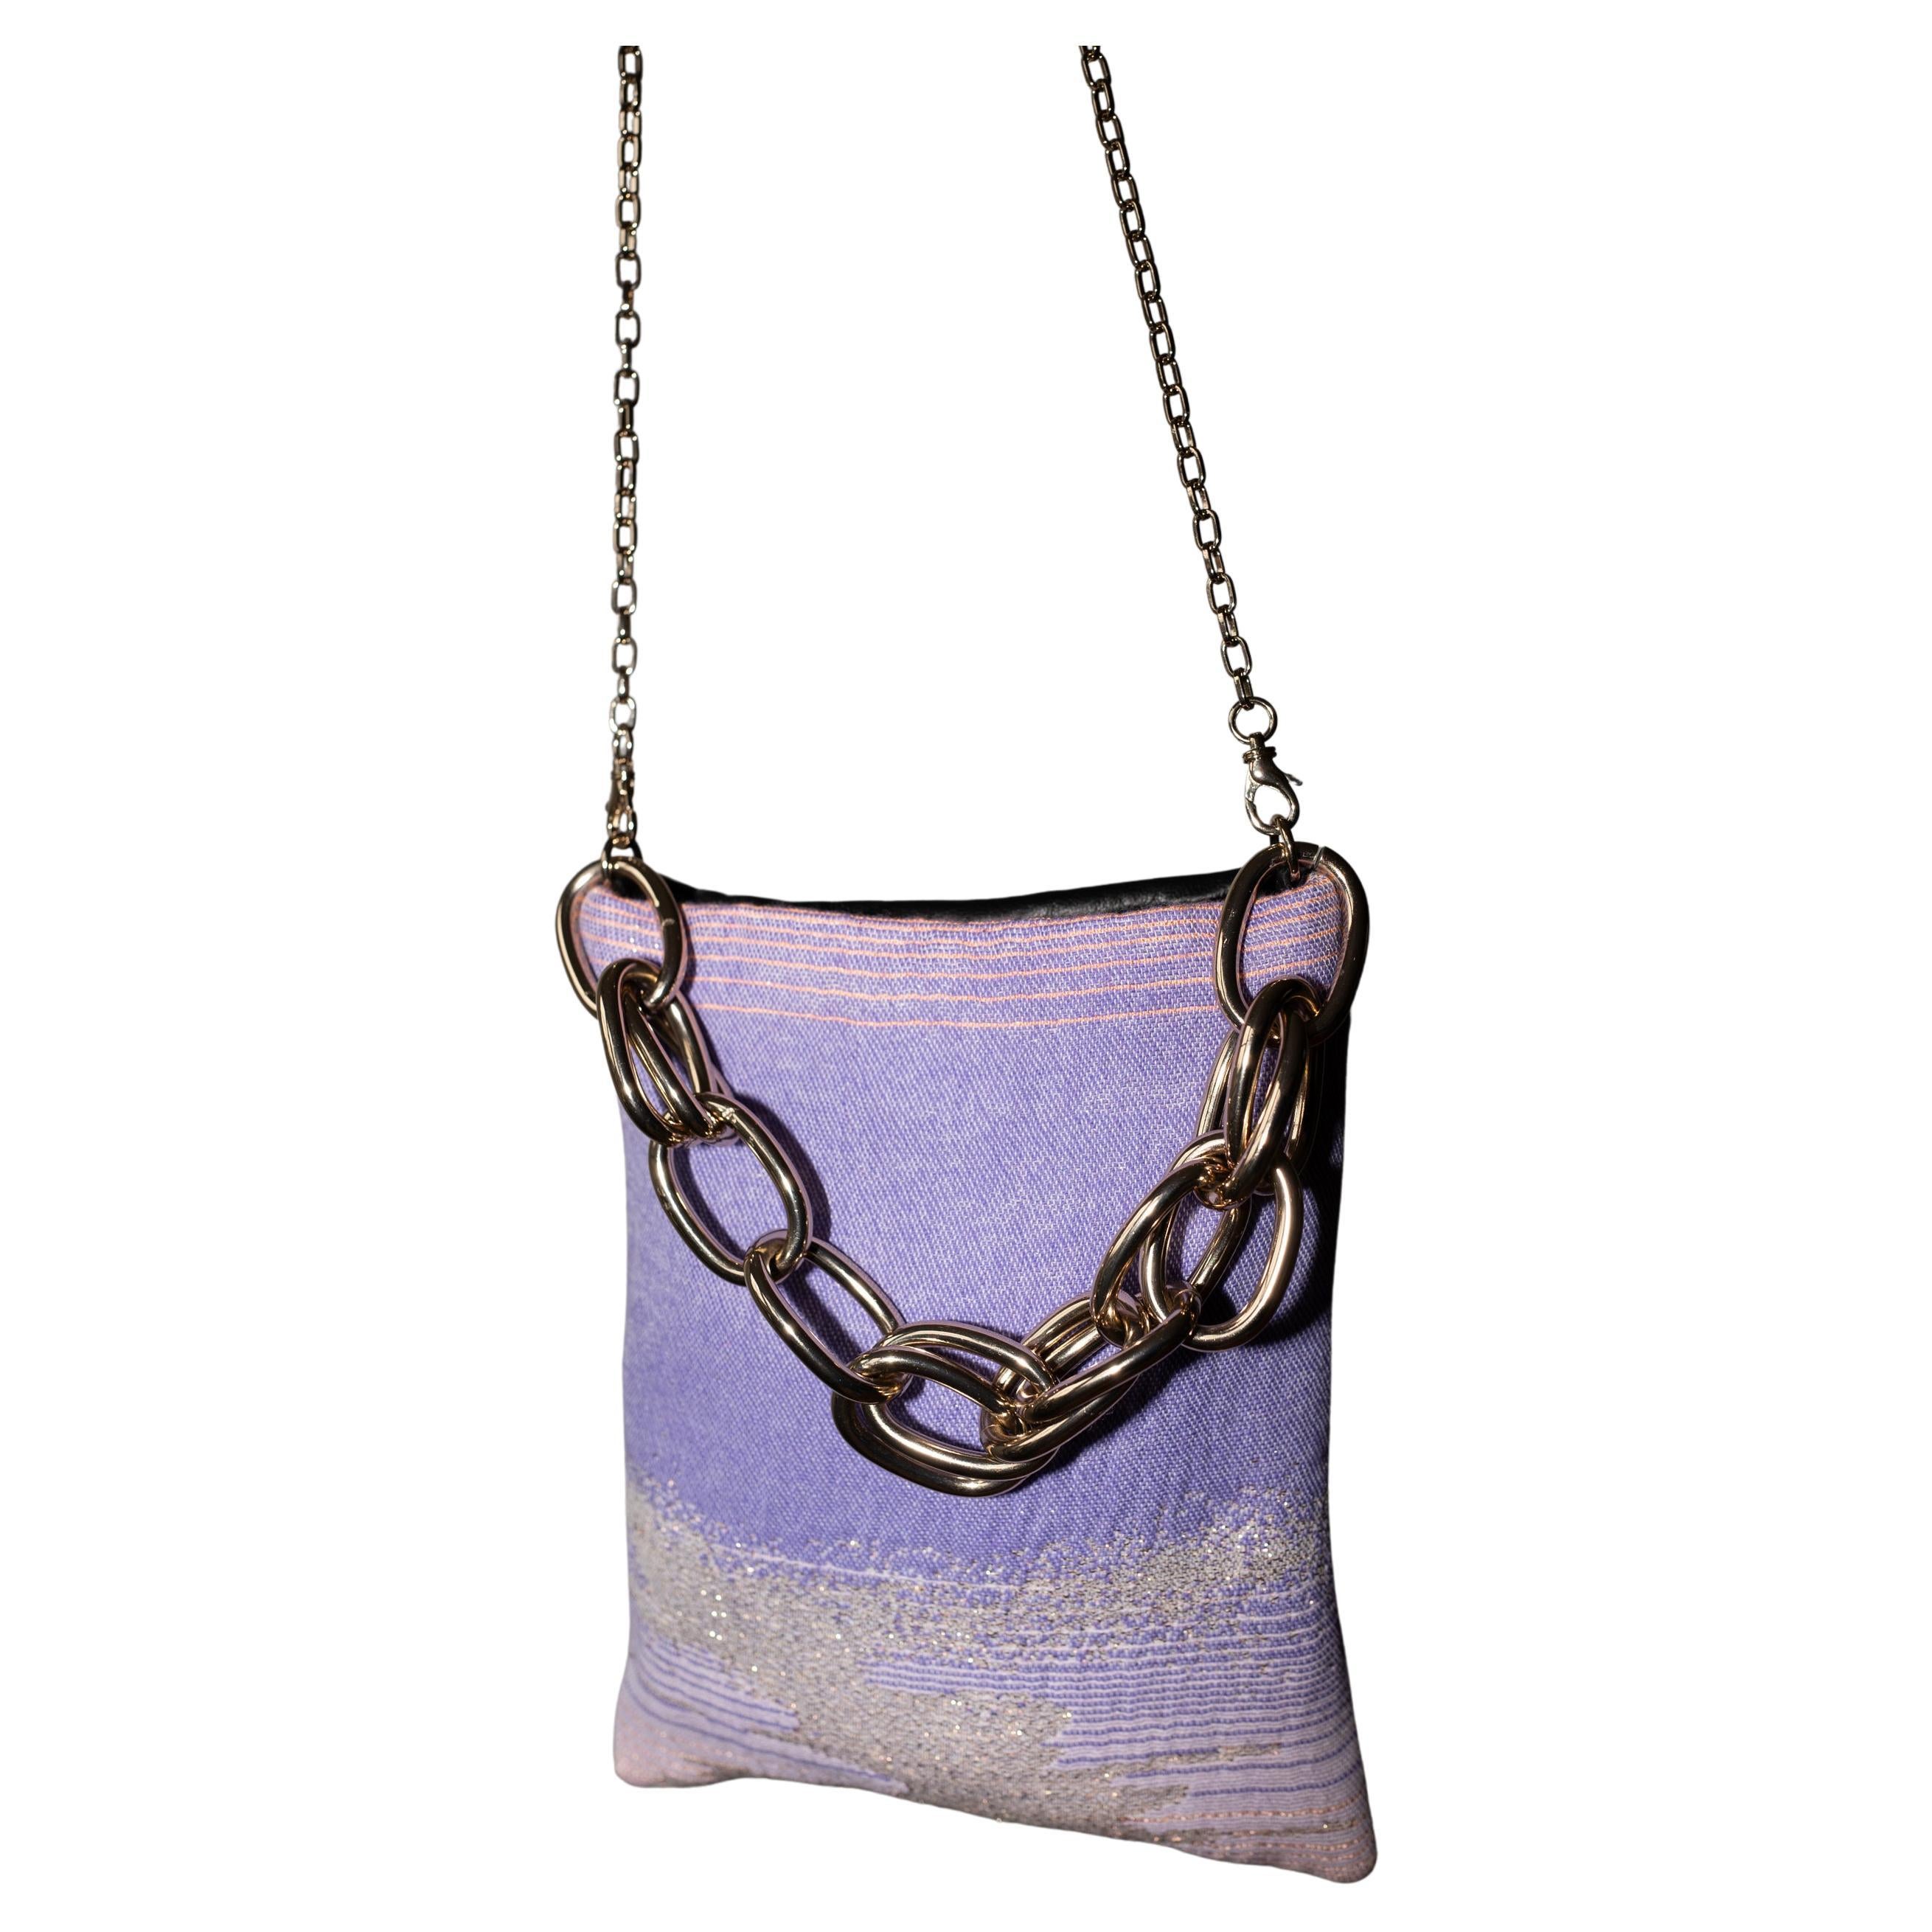 One of a kind Evening Shoulder Bag French Pastel Lilac Pink Lurex Fabric on one side and on the other Italian Black Leather, Italian Gold Plated Brass Shoulder Chain Detachable  and Chunky Gold Chain Handle J Dauphin

Size: Height 21 cm, Width 17